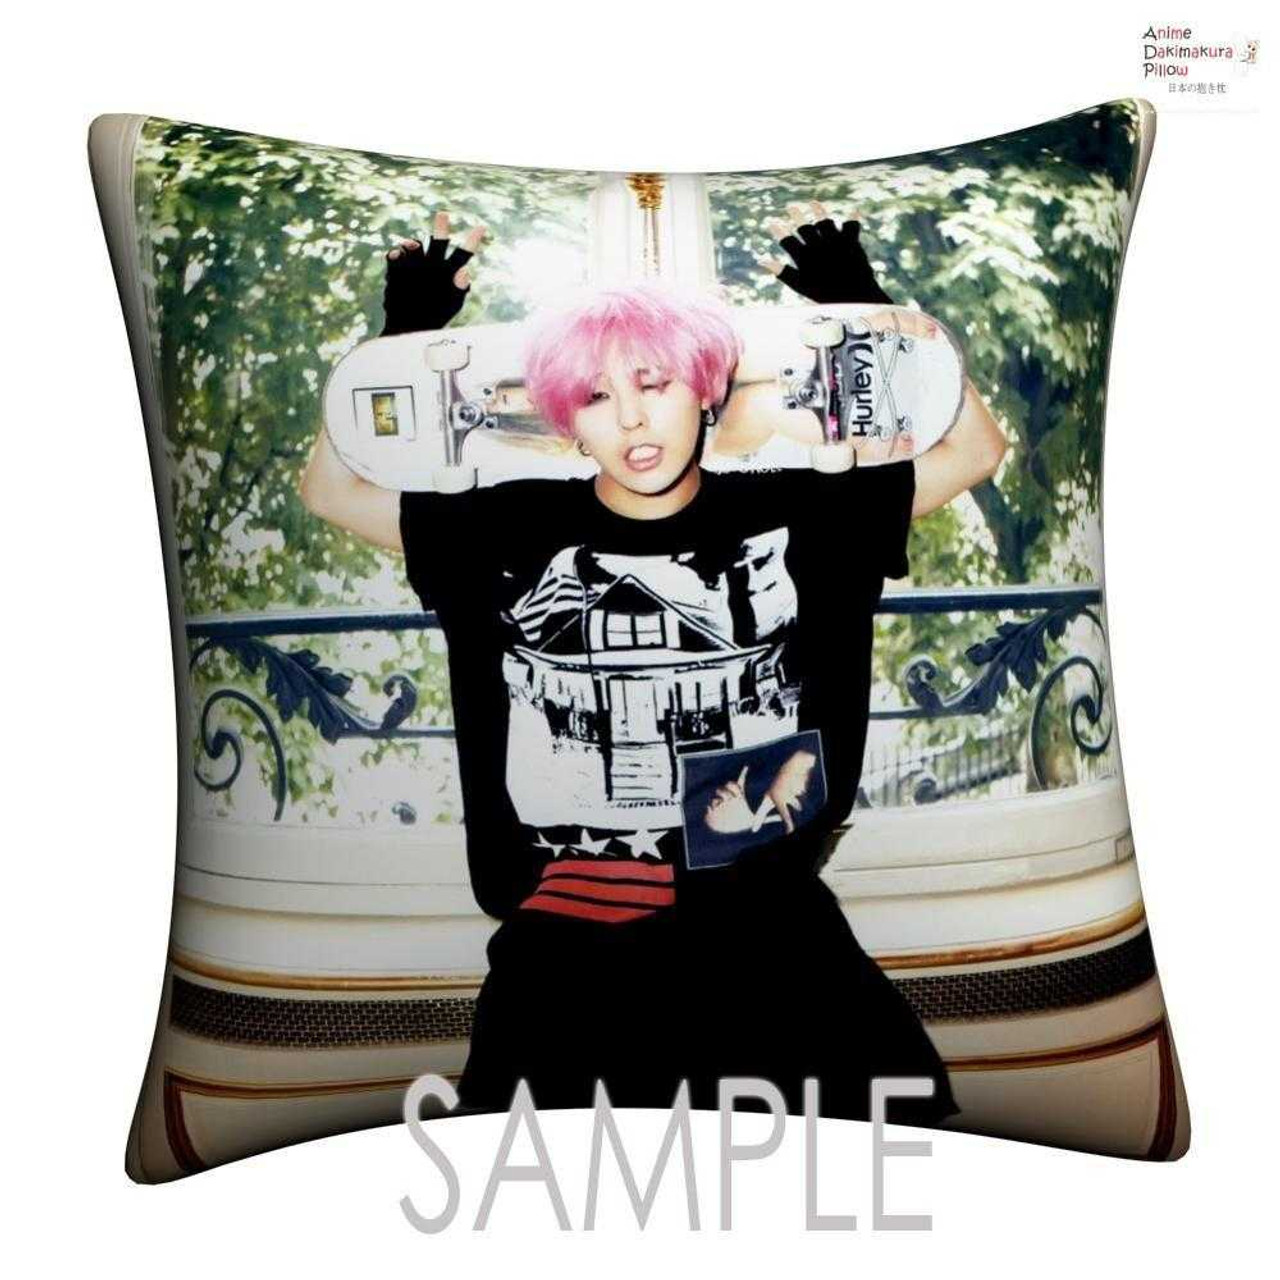 New One Direction Throw Pillow Case cushion pillowcase cover3